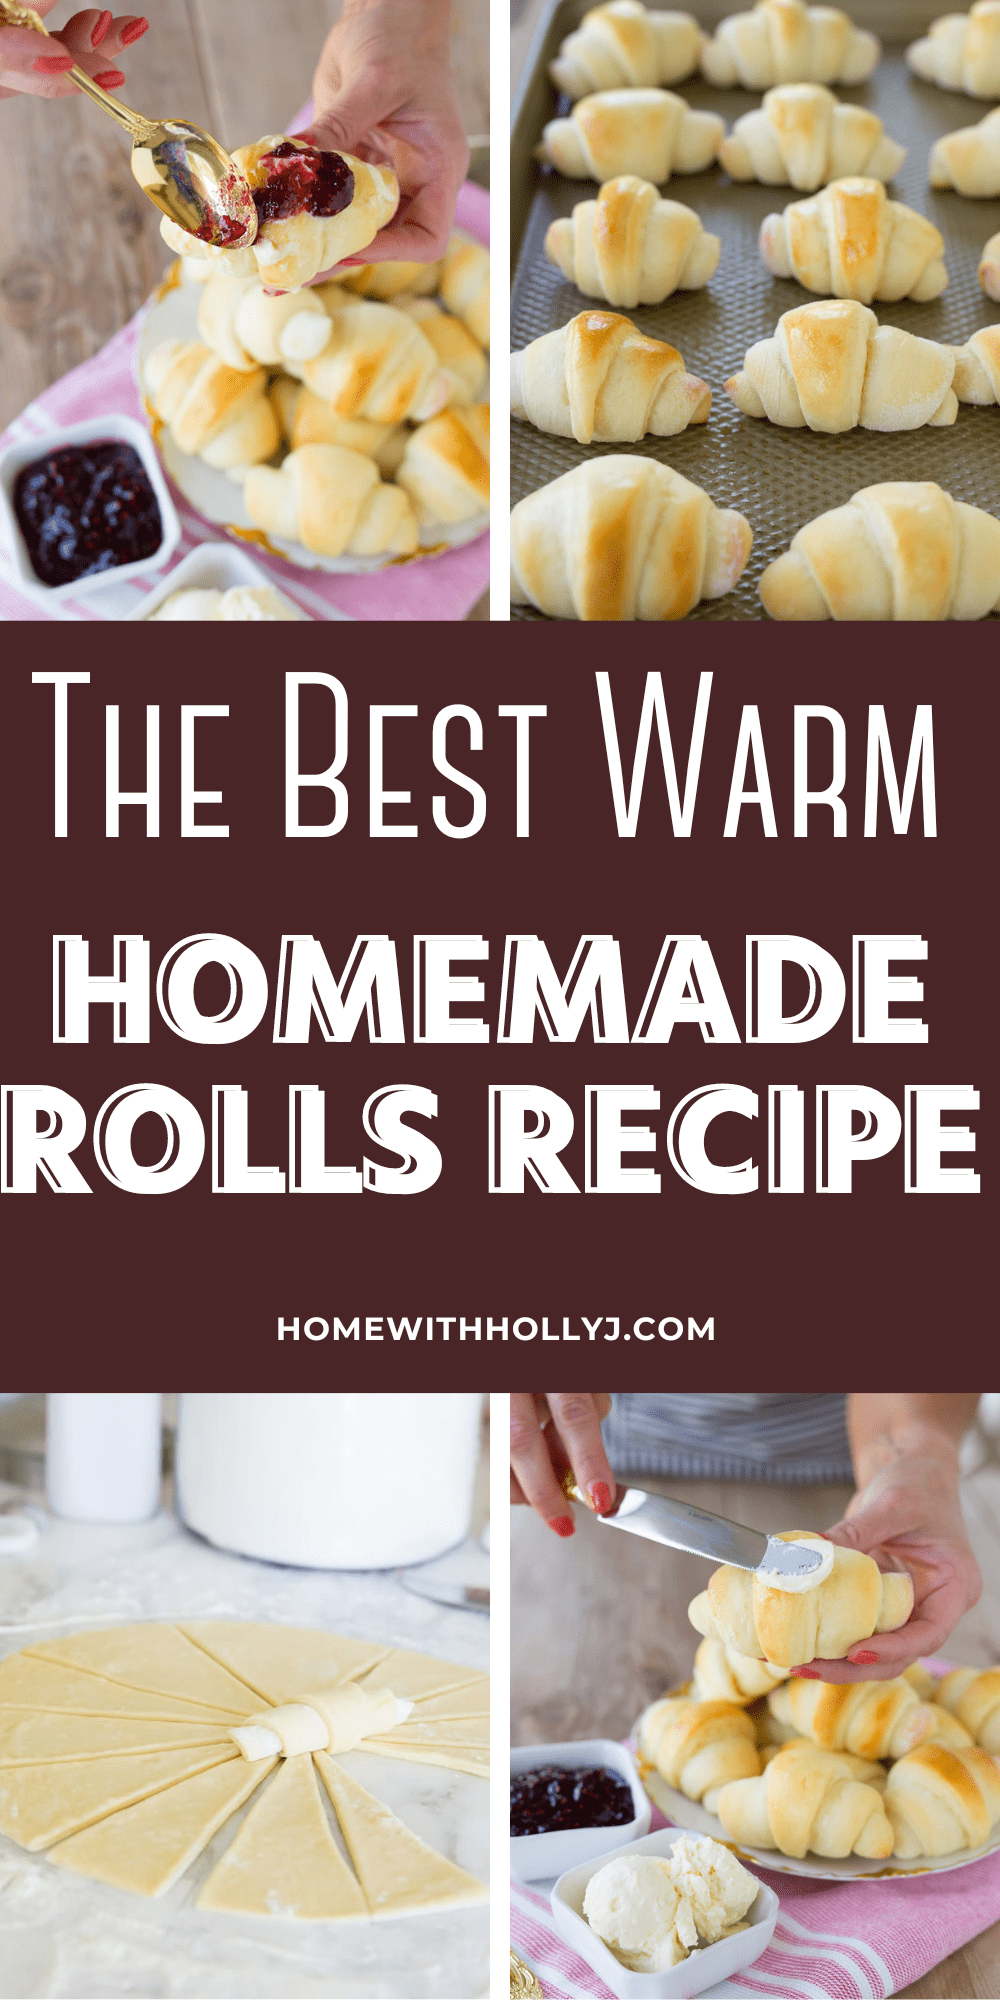 Sharing my family's favorite warm homemade rolls recipe and how to make these delicious rolls with butter and jam. Get the recipe here.